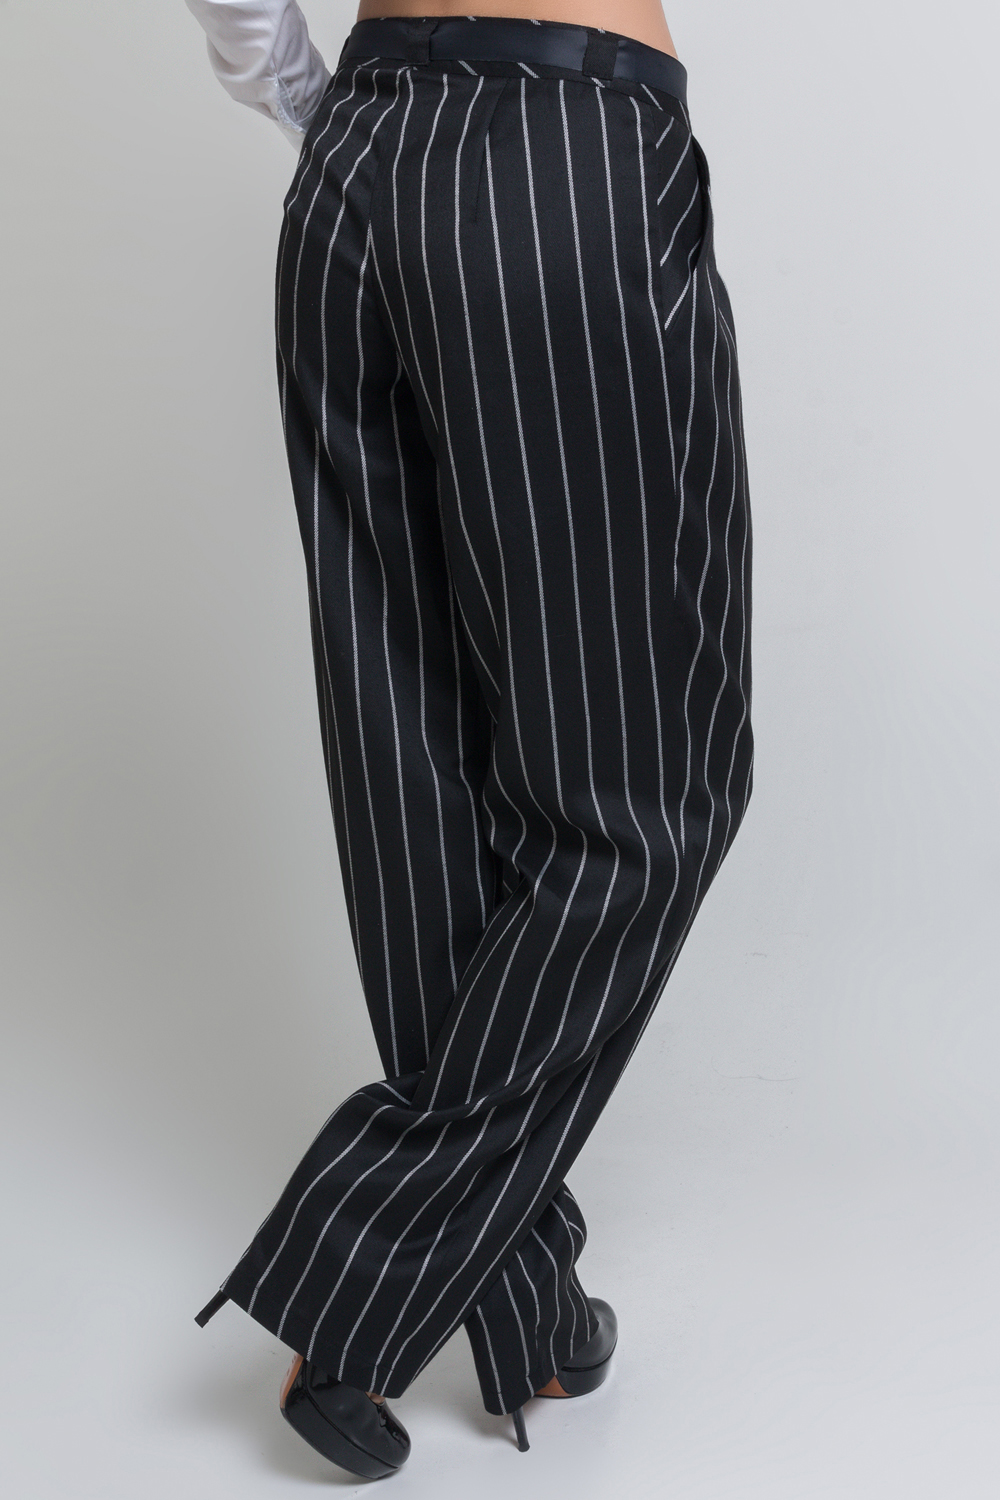 Black striped trousers